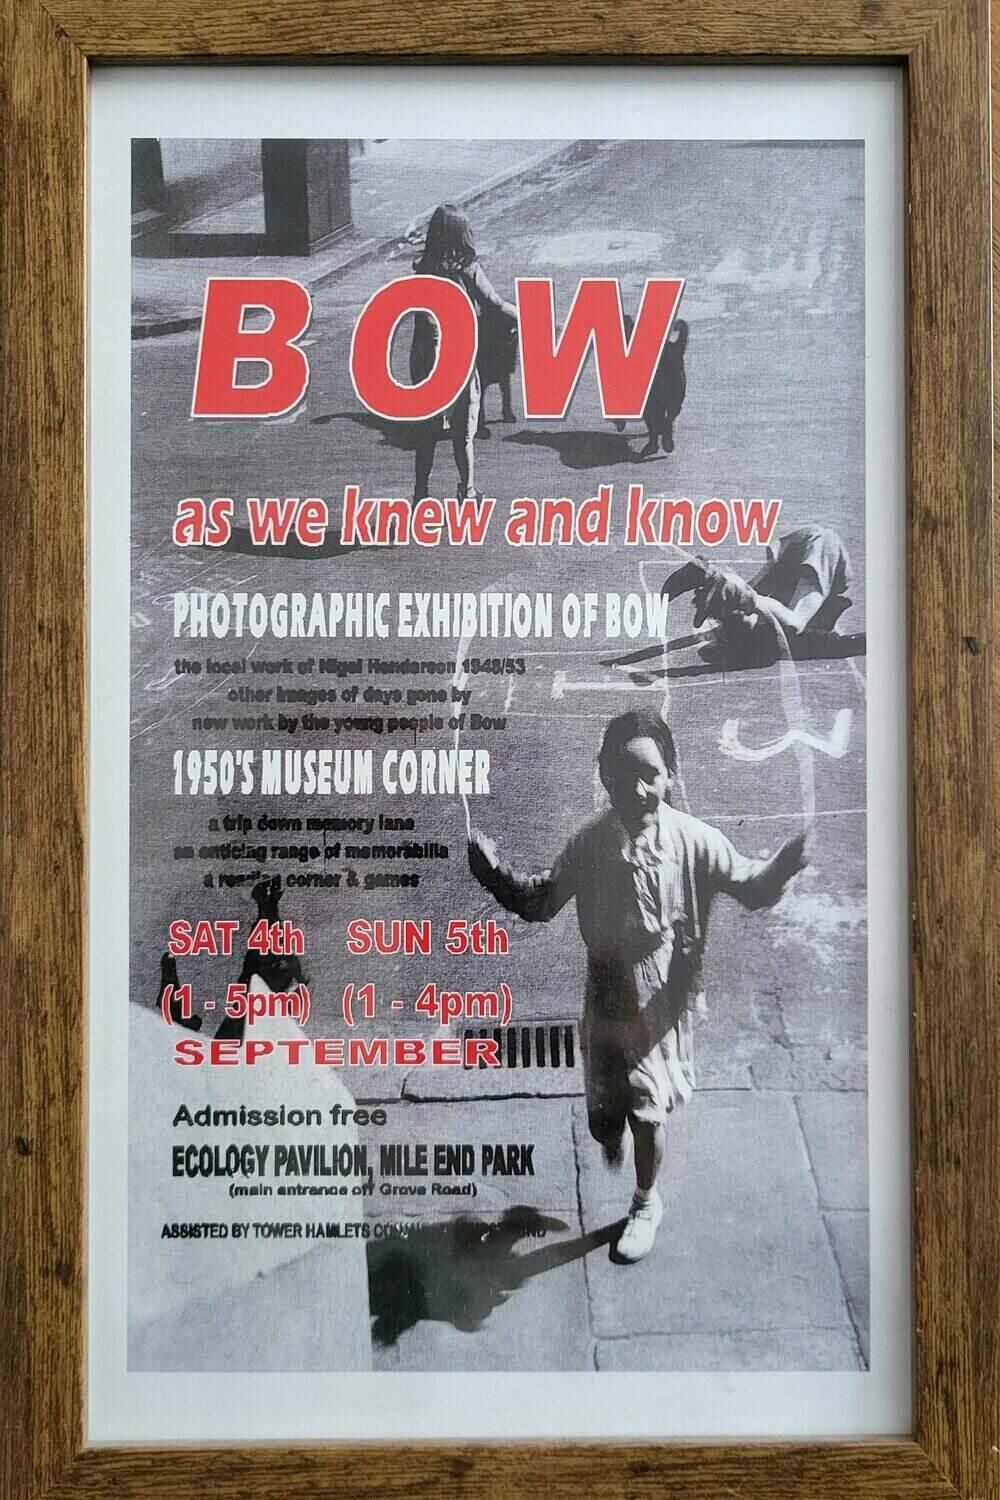 'Bow as we knew and know' Nigel Henderson photographic exhibition framed poster.